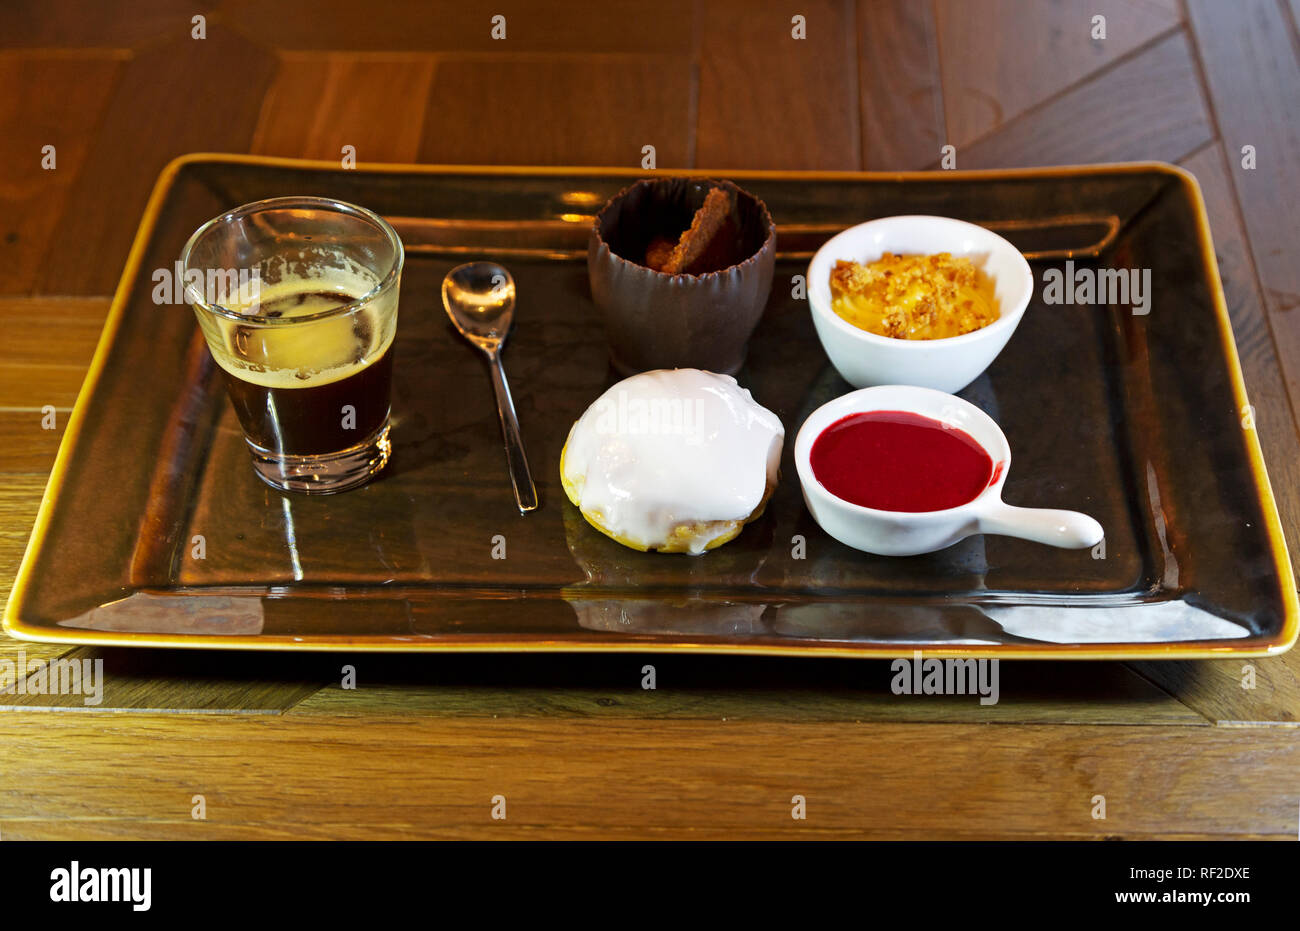 A café gourmand served in France. The dish is a coffee served with a selection of the day's desserts. Stock Photo